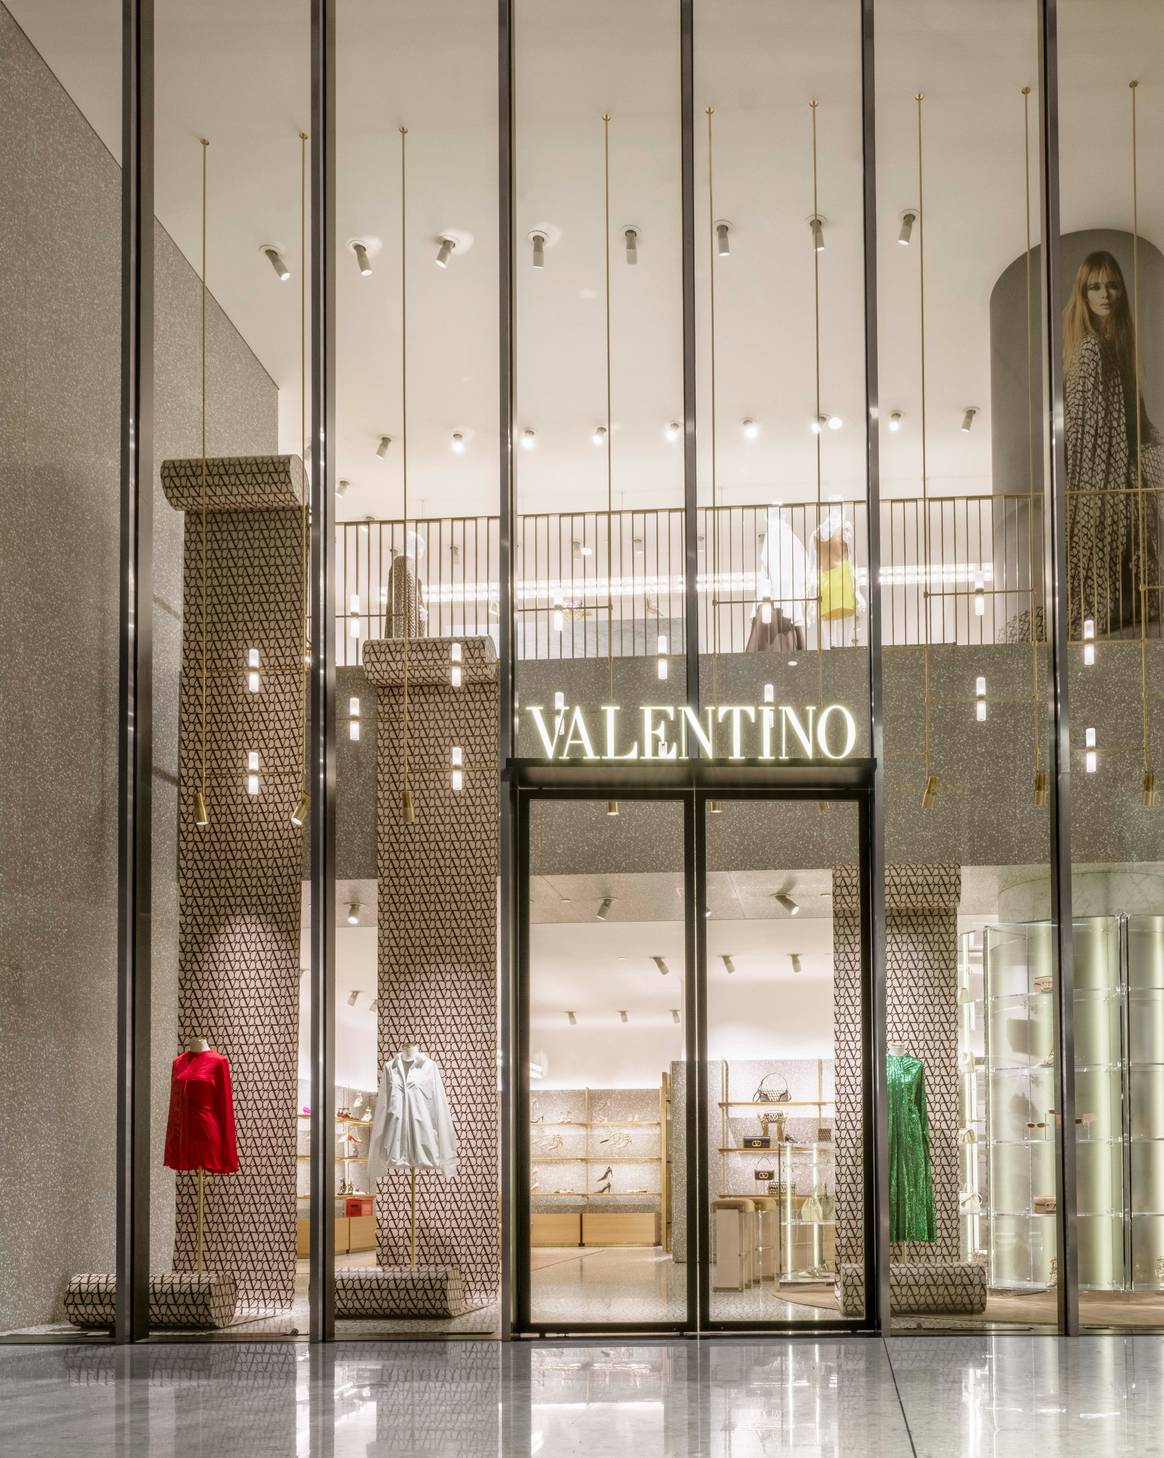 Image: Valentino; Valentino 'Unboxed' Shanghai by Mix Wei